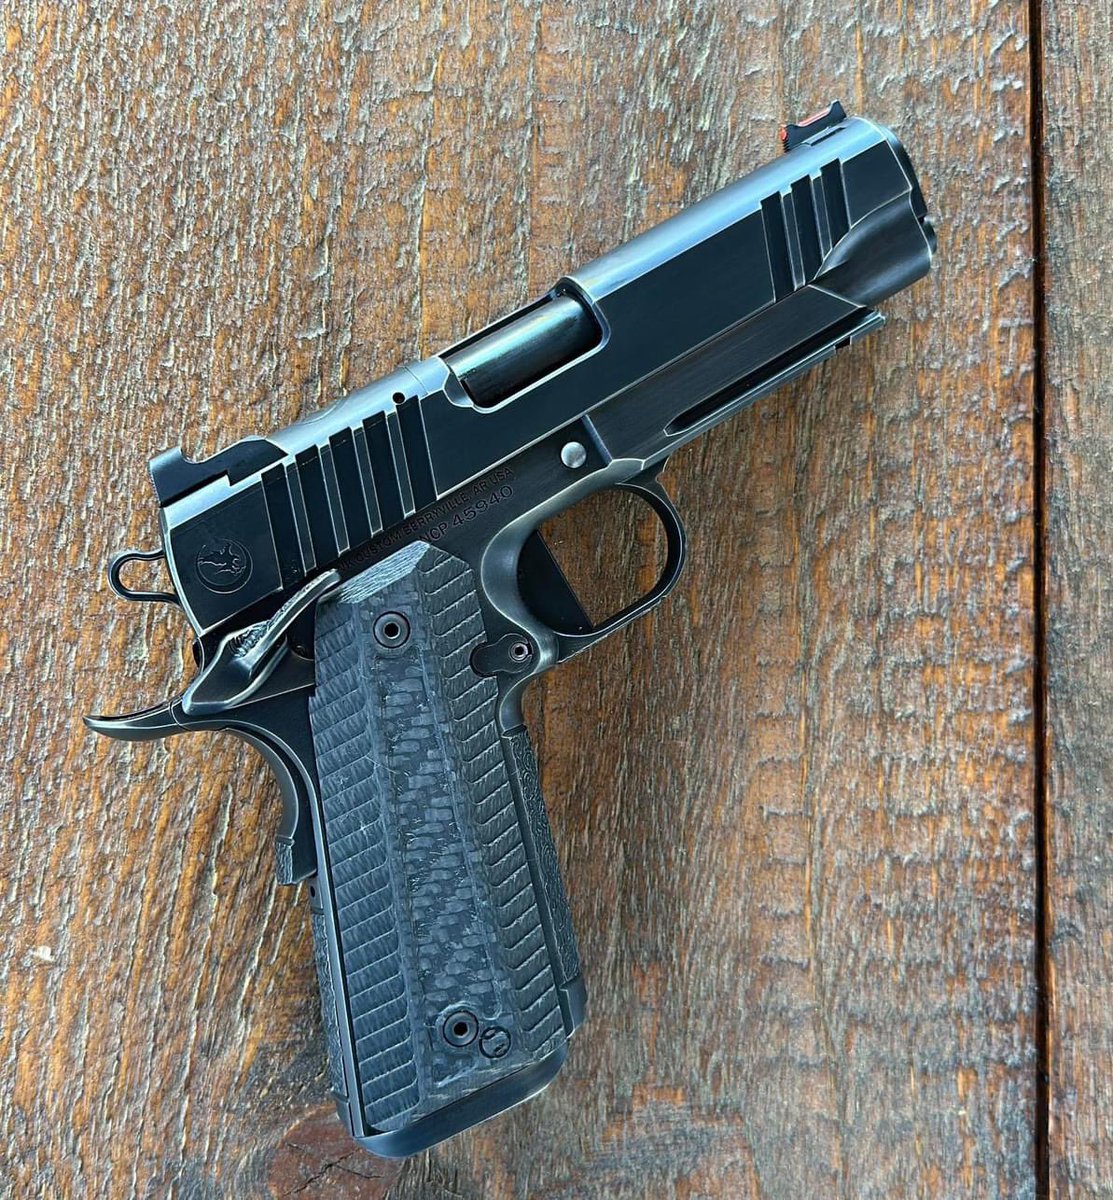 No filter needed. Custom spec’d Trooper Commander is 🔥🔥 

✔️ Tasteful Hand Stippling throughout 
✔️ IOS (Interchangeable Optic System) 
✔️ One Piece Magwell
✔️ Recon Rail 
✔️Carbon Fiber Grips